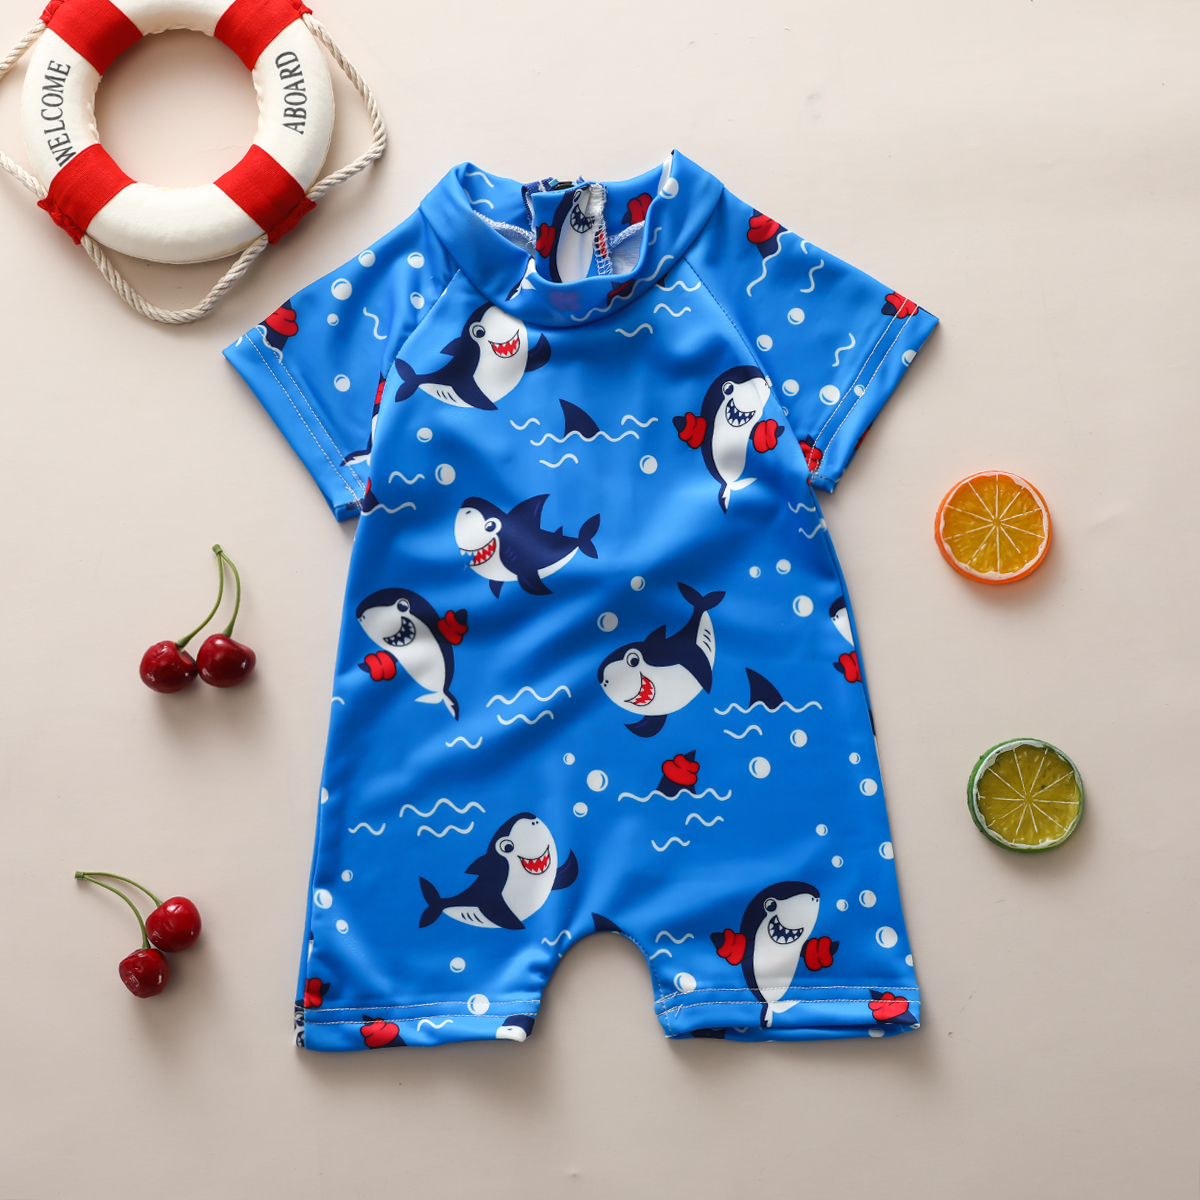 Summer Kids Baby Boys Swimsuit Swimwear Shark Print Short Sleeve Boys One Piece Swimming Suit Beach Bathing Suit Outfit 6-12 Months - image 1 of 6